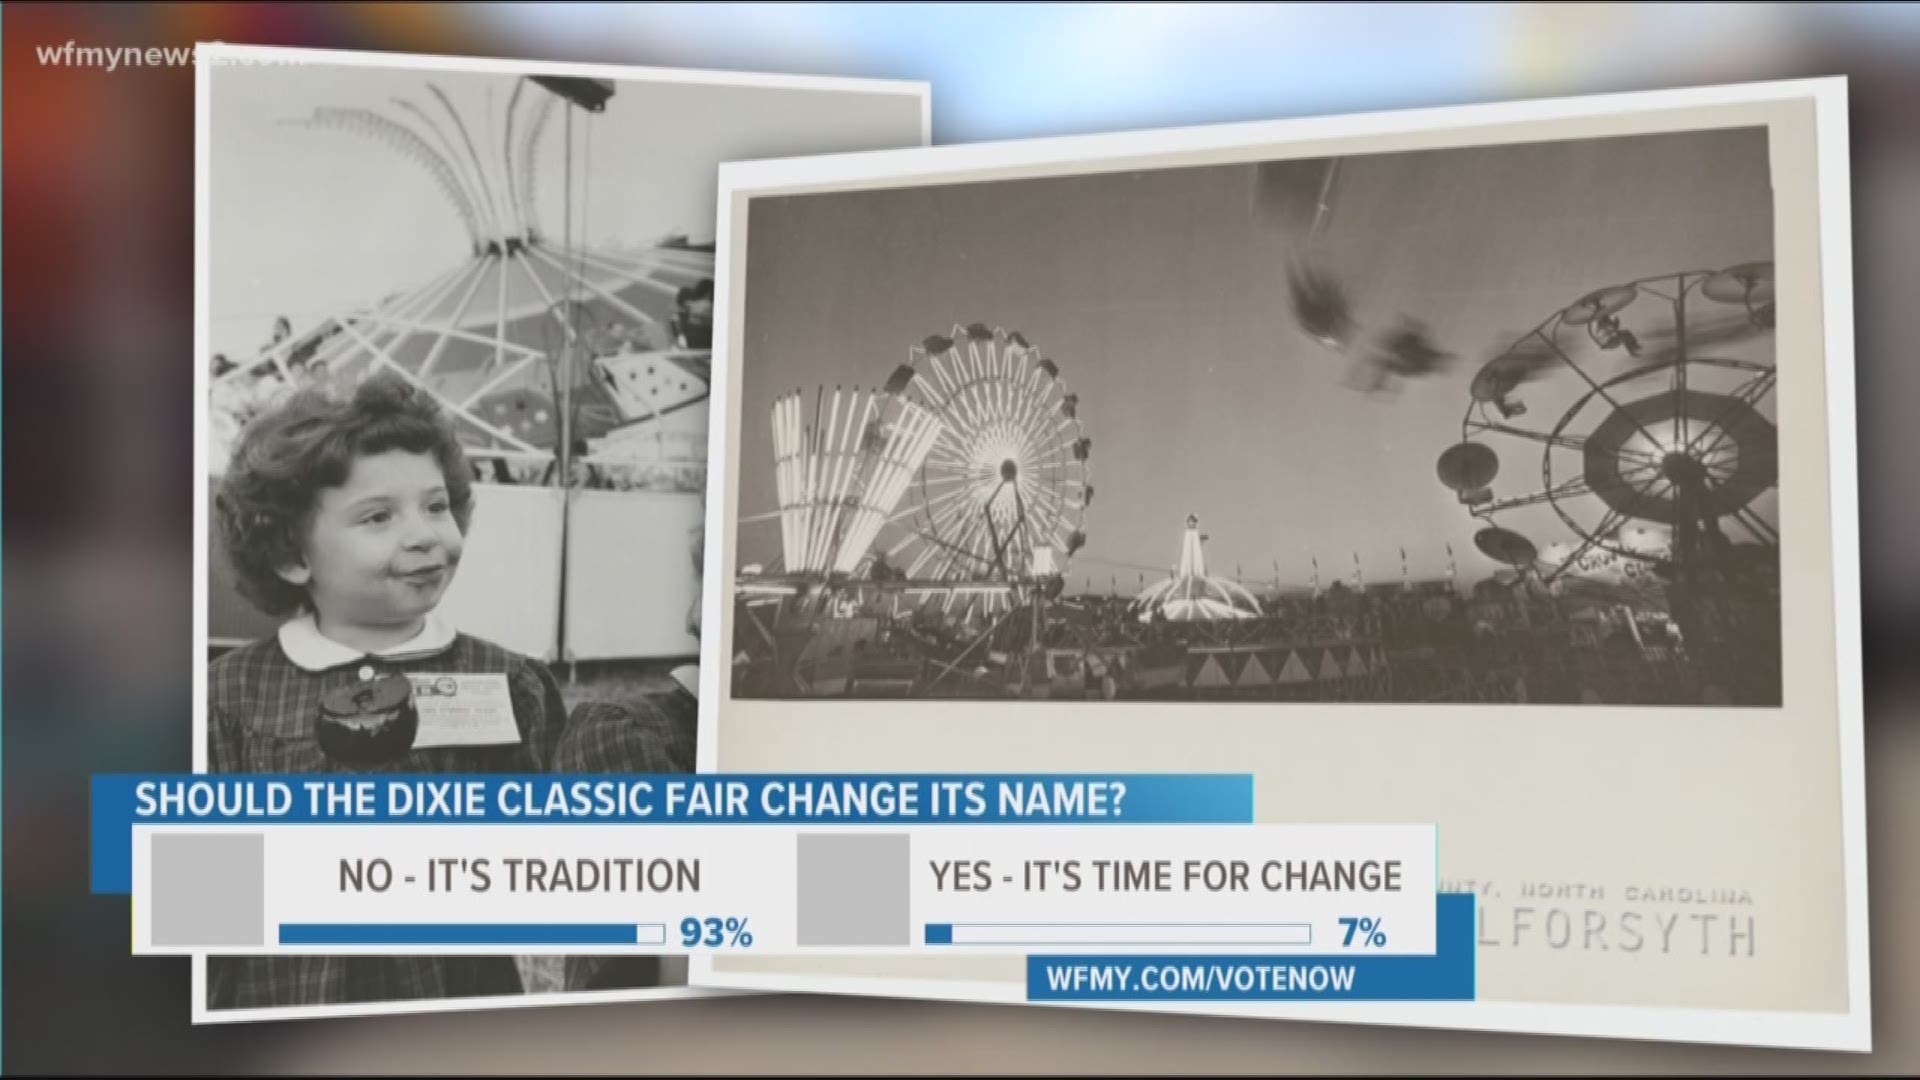 Since 1956, the state's second largest fair has been known as the Dixie Classic Fair. But the City of Winston-Salem thinks its time to take "dixie" out of the name. 
WFMY News 2's Laura Brache got a pulse of the community's reactions to the change.